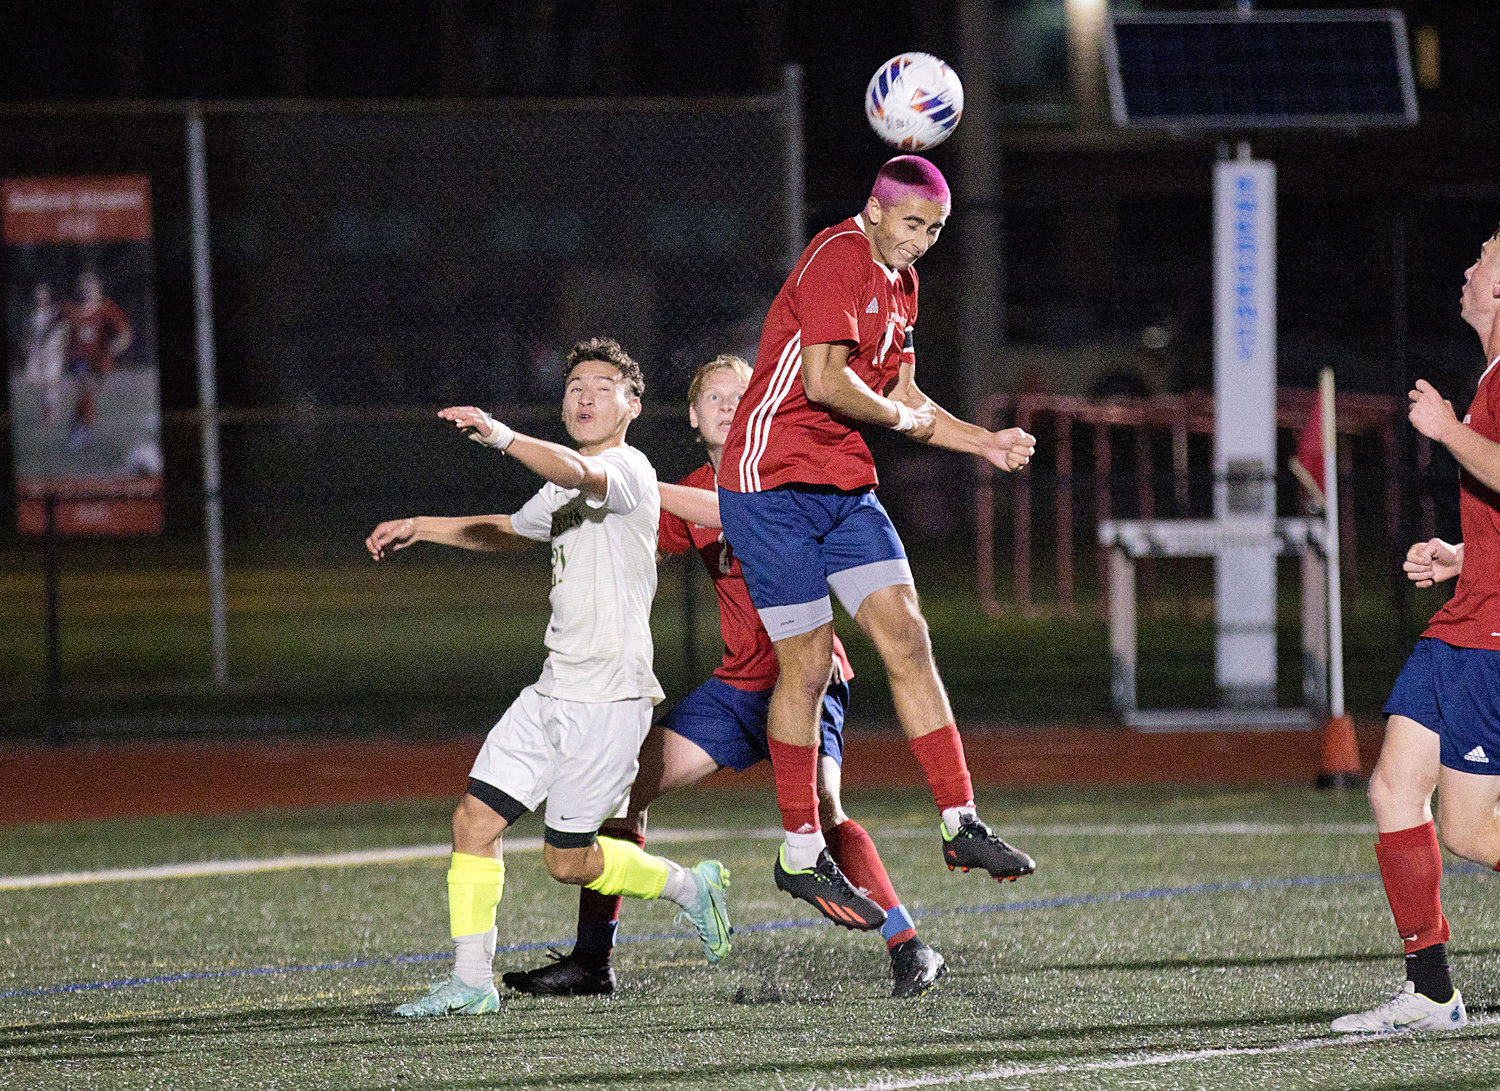 Portsmouth High’s Jackson Fox cuts Bishop Hendricken's 2-0 lead in half with a header into the goal in the second half of Thursday's Division I quarterfinal match.